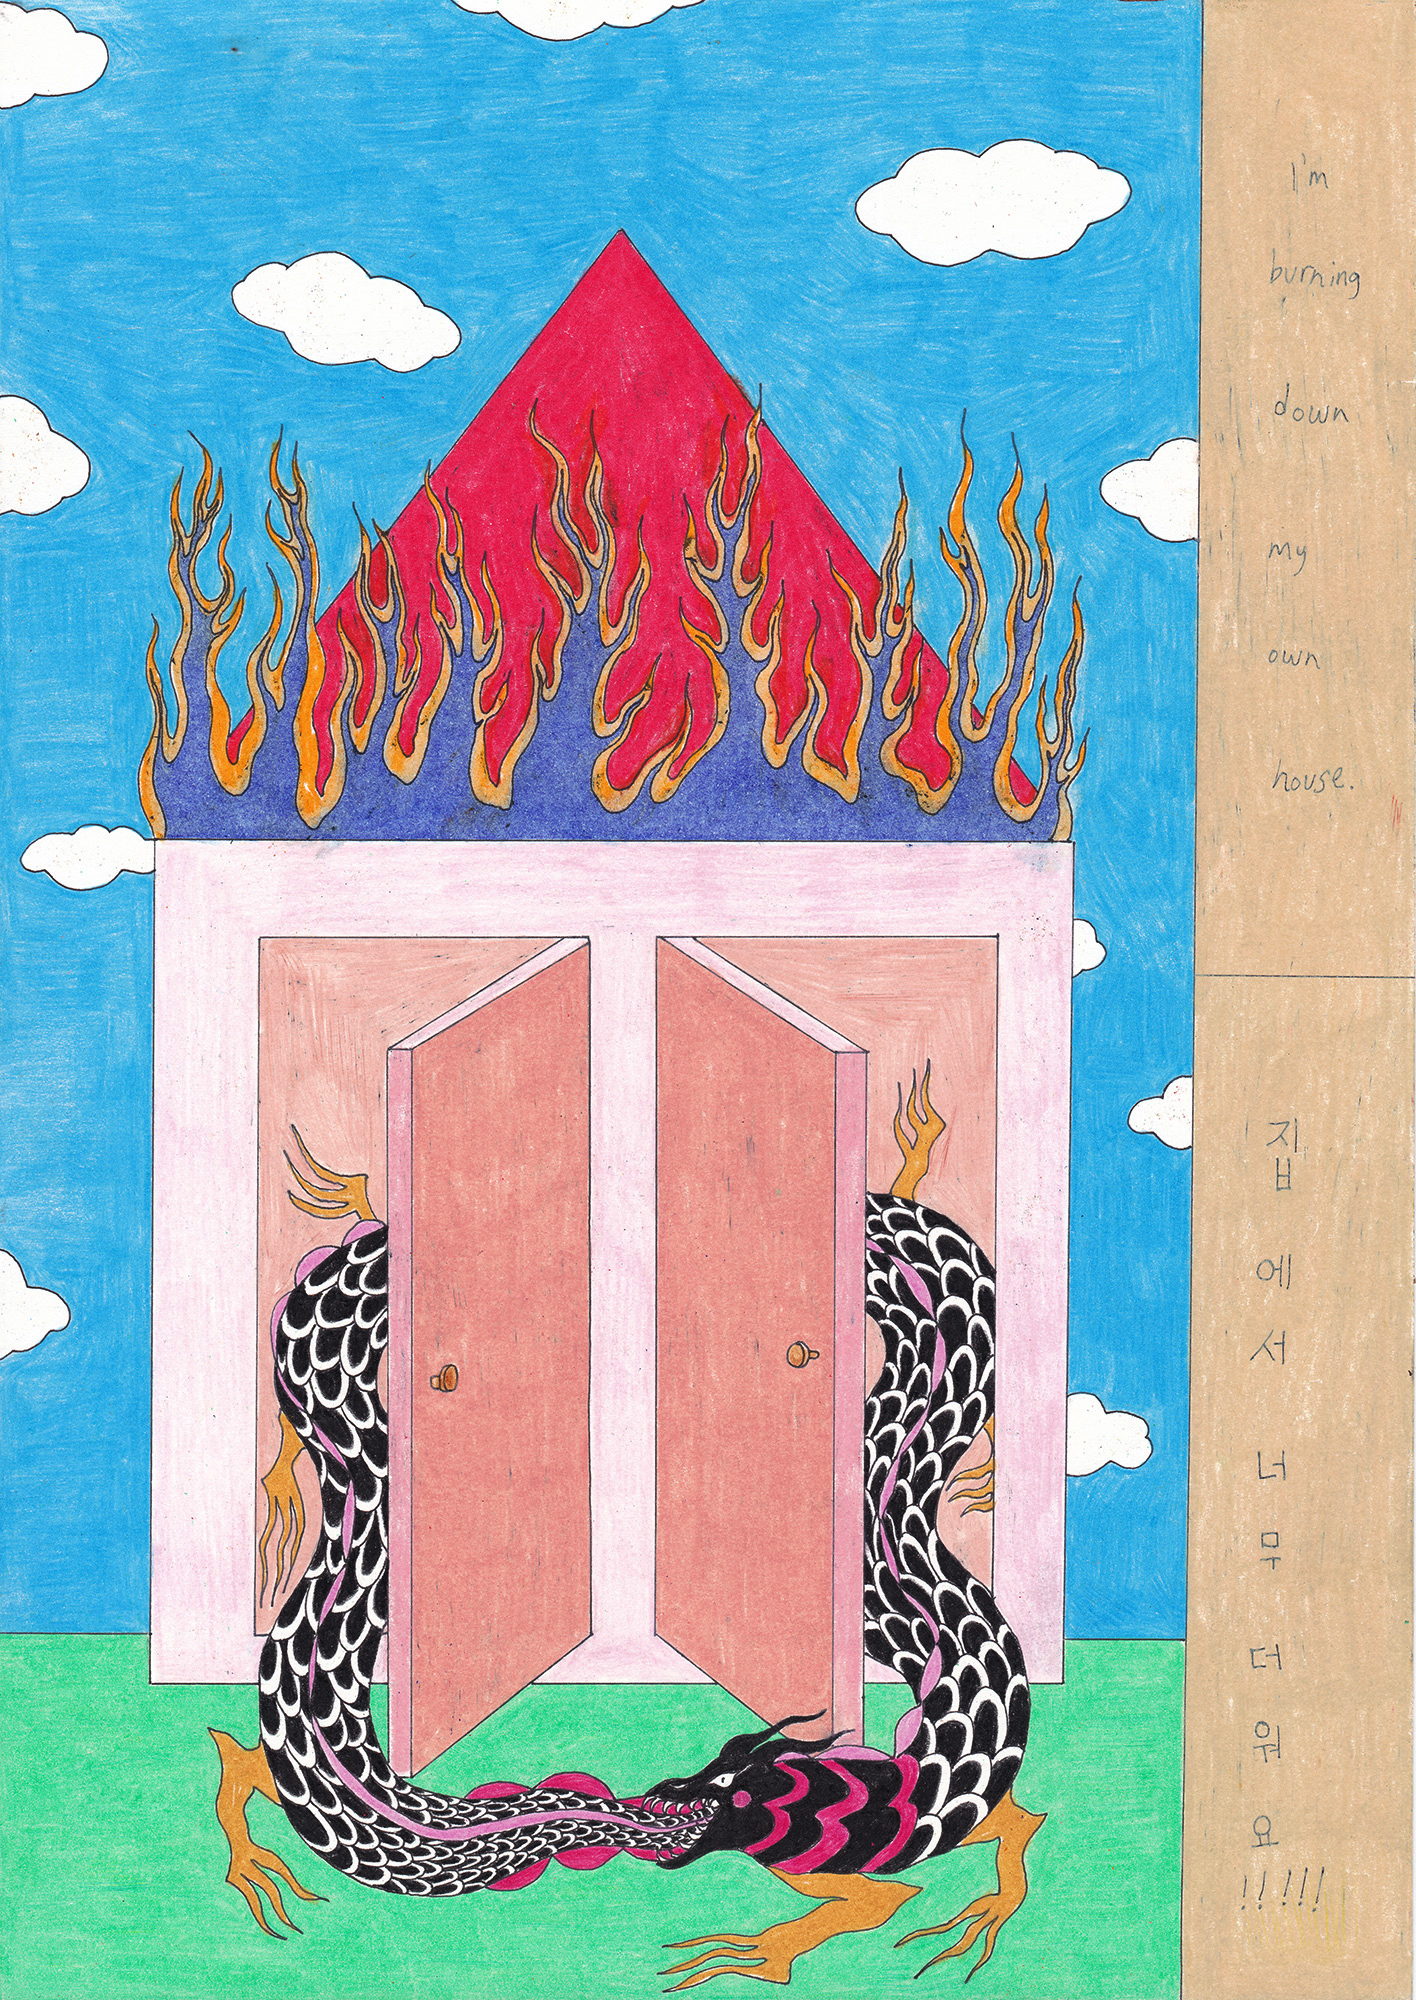 This is a colored pencil drawing, depicting a simple pink house set against a green lawn and a bright blue sky. The red roof of the house is engulfed by blue flames. Two large doors dominate the facade. Both doors are open, and the long body of a black-scaled dragon loops through the doors, simultaneously entering and exiting the house. The dragon is consuming its own tail. On the right side of the image, handwritten text in English reads: 'I am Burning Down My Own House,' and in Korean: 'My House Is Too Hot.'